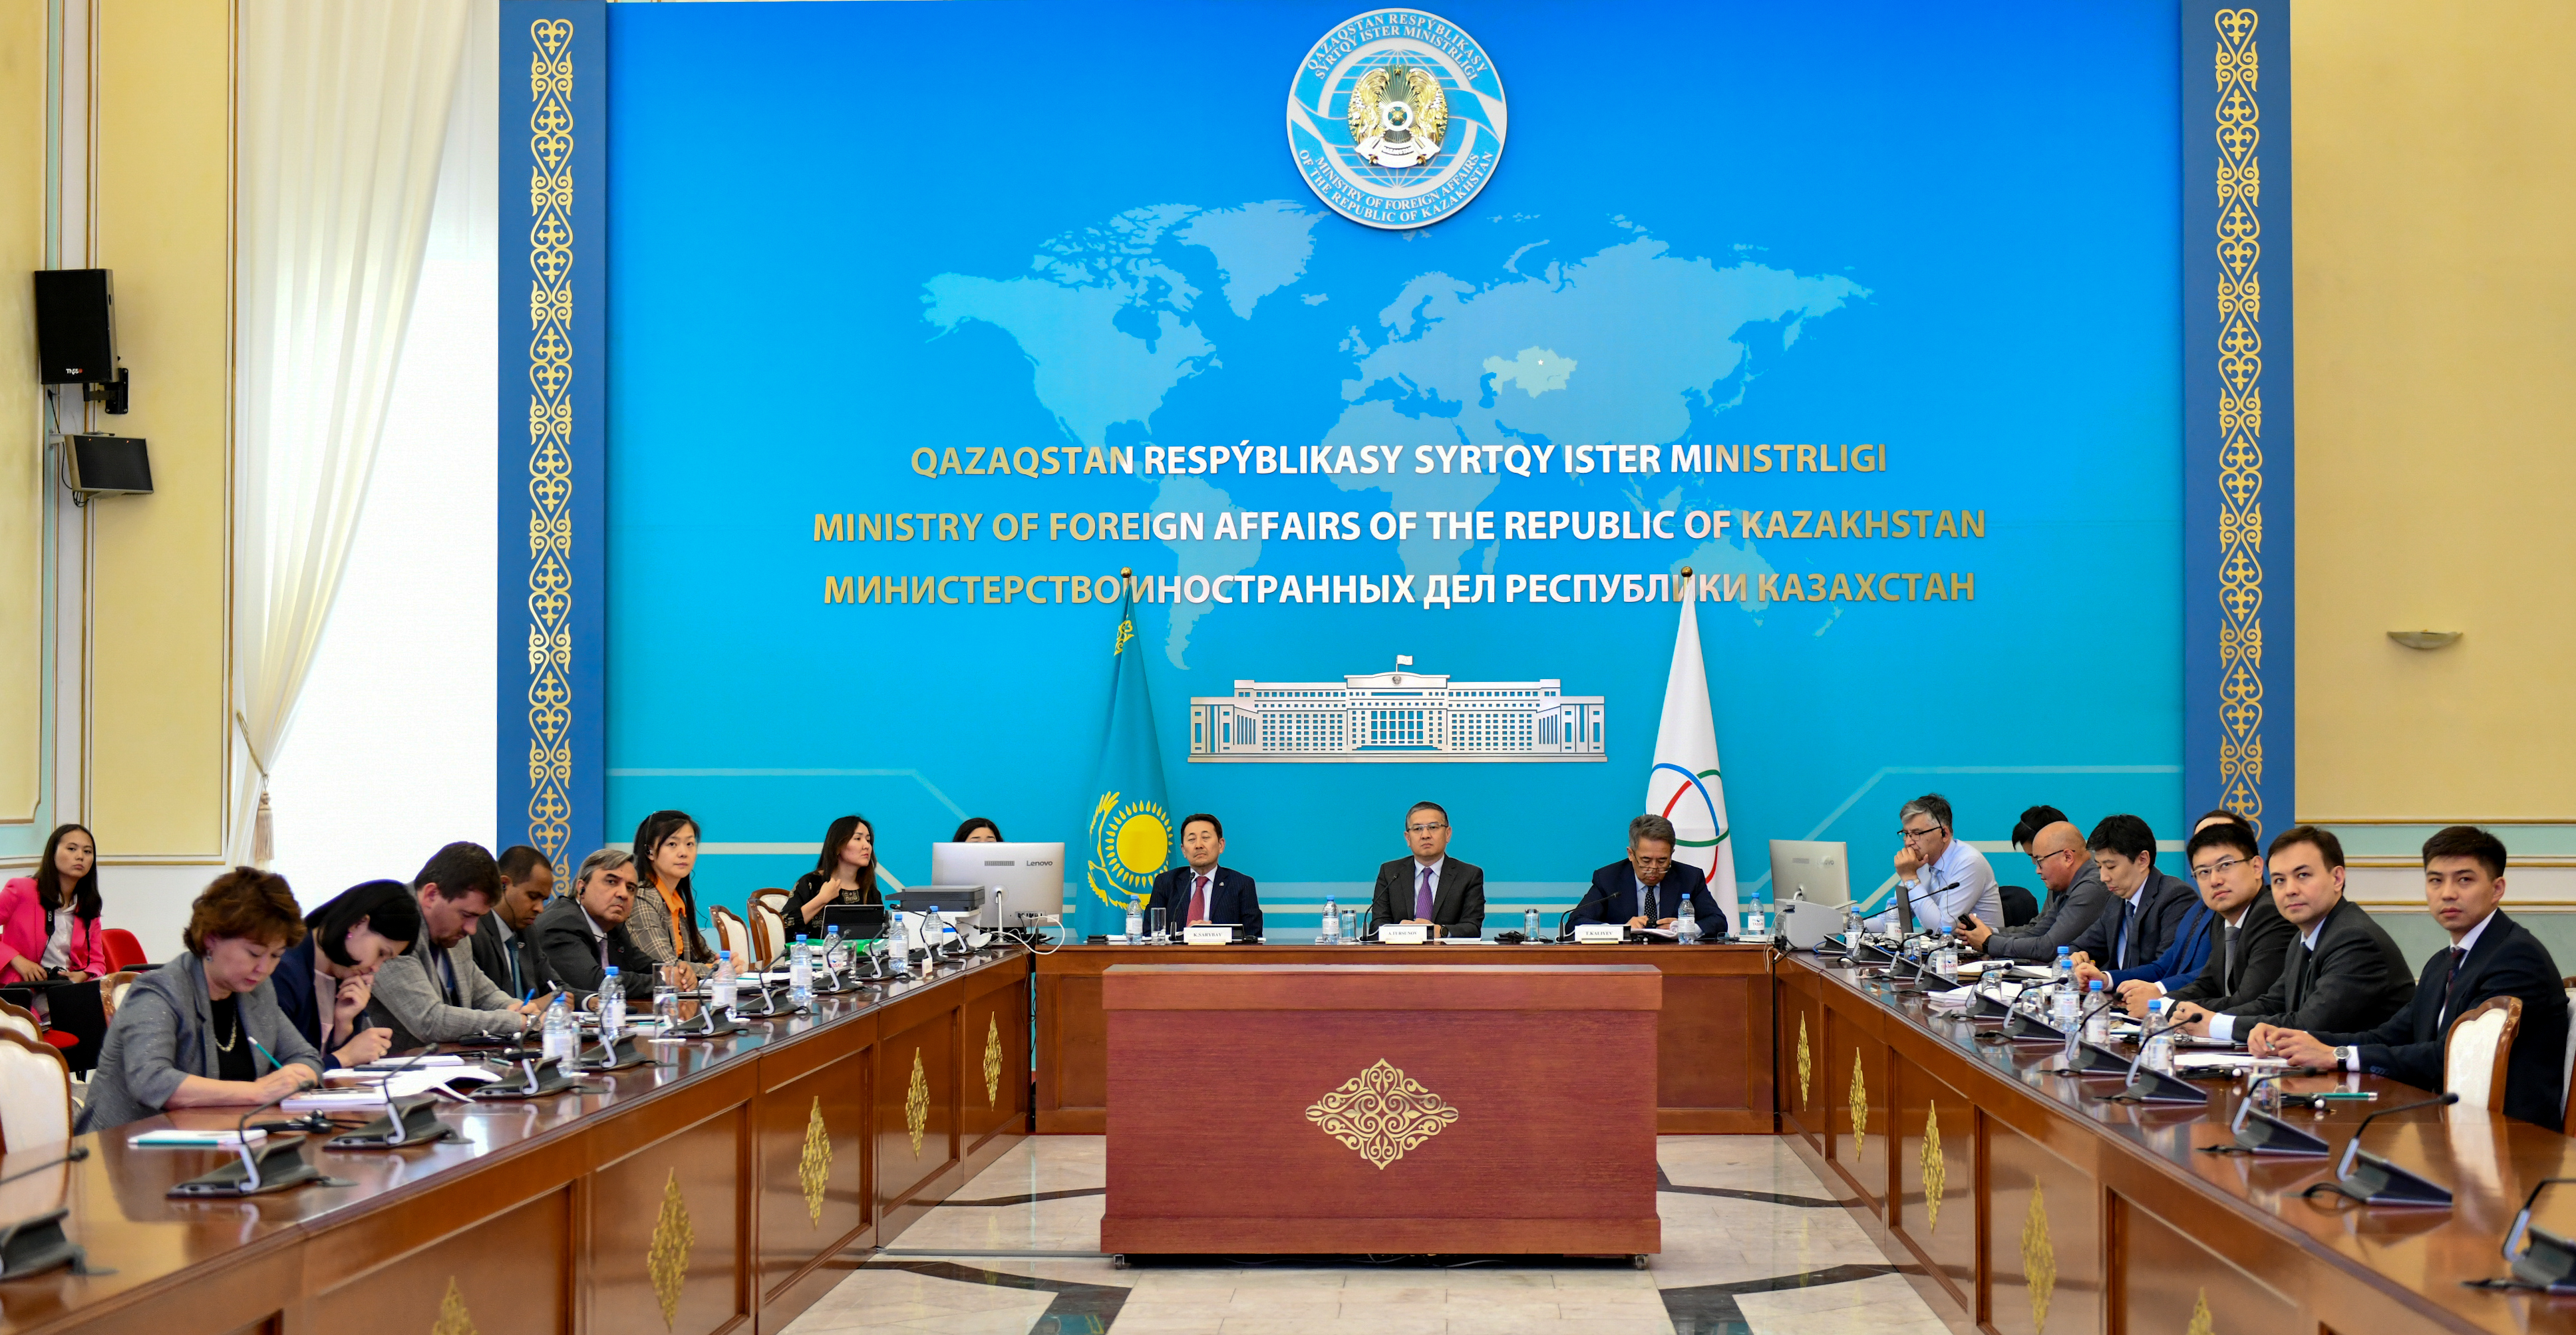 Ways to Increase the Effectiveness of Cooperation in Economic Dimension of CICA Discussed under the Kazakh Chairmanship